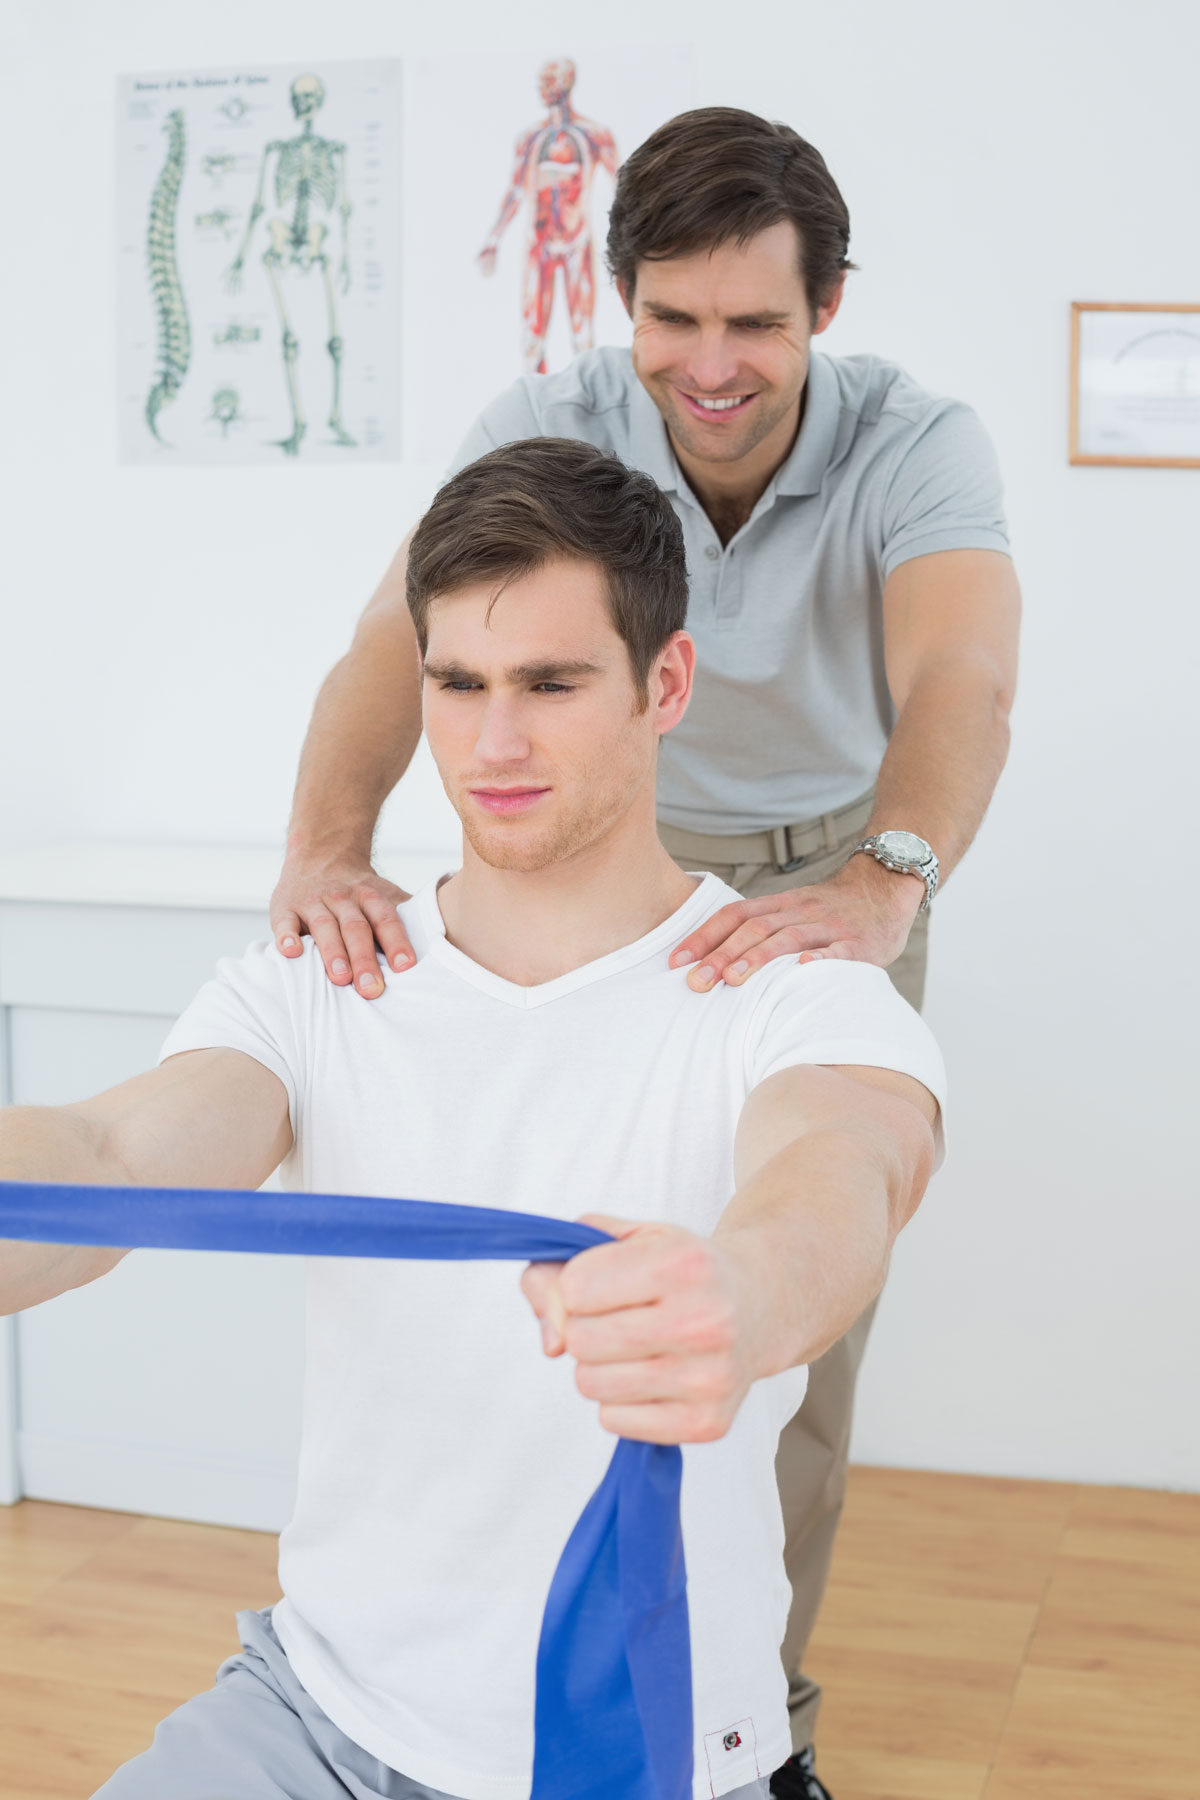 injury centers of brevard - brevard specializes in personal injury setting and chiropractic evaluation with chiropractic ultrasound